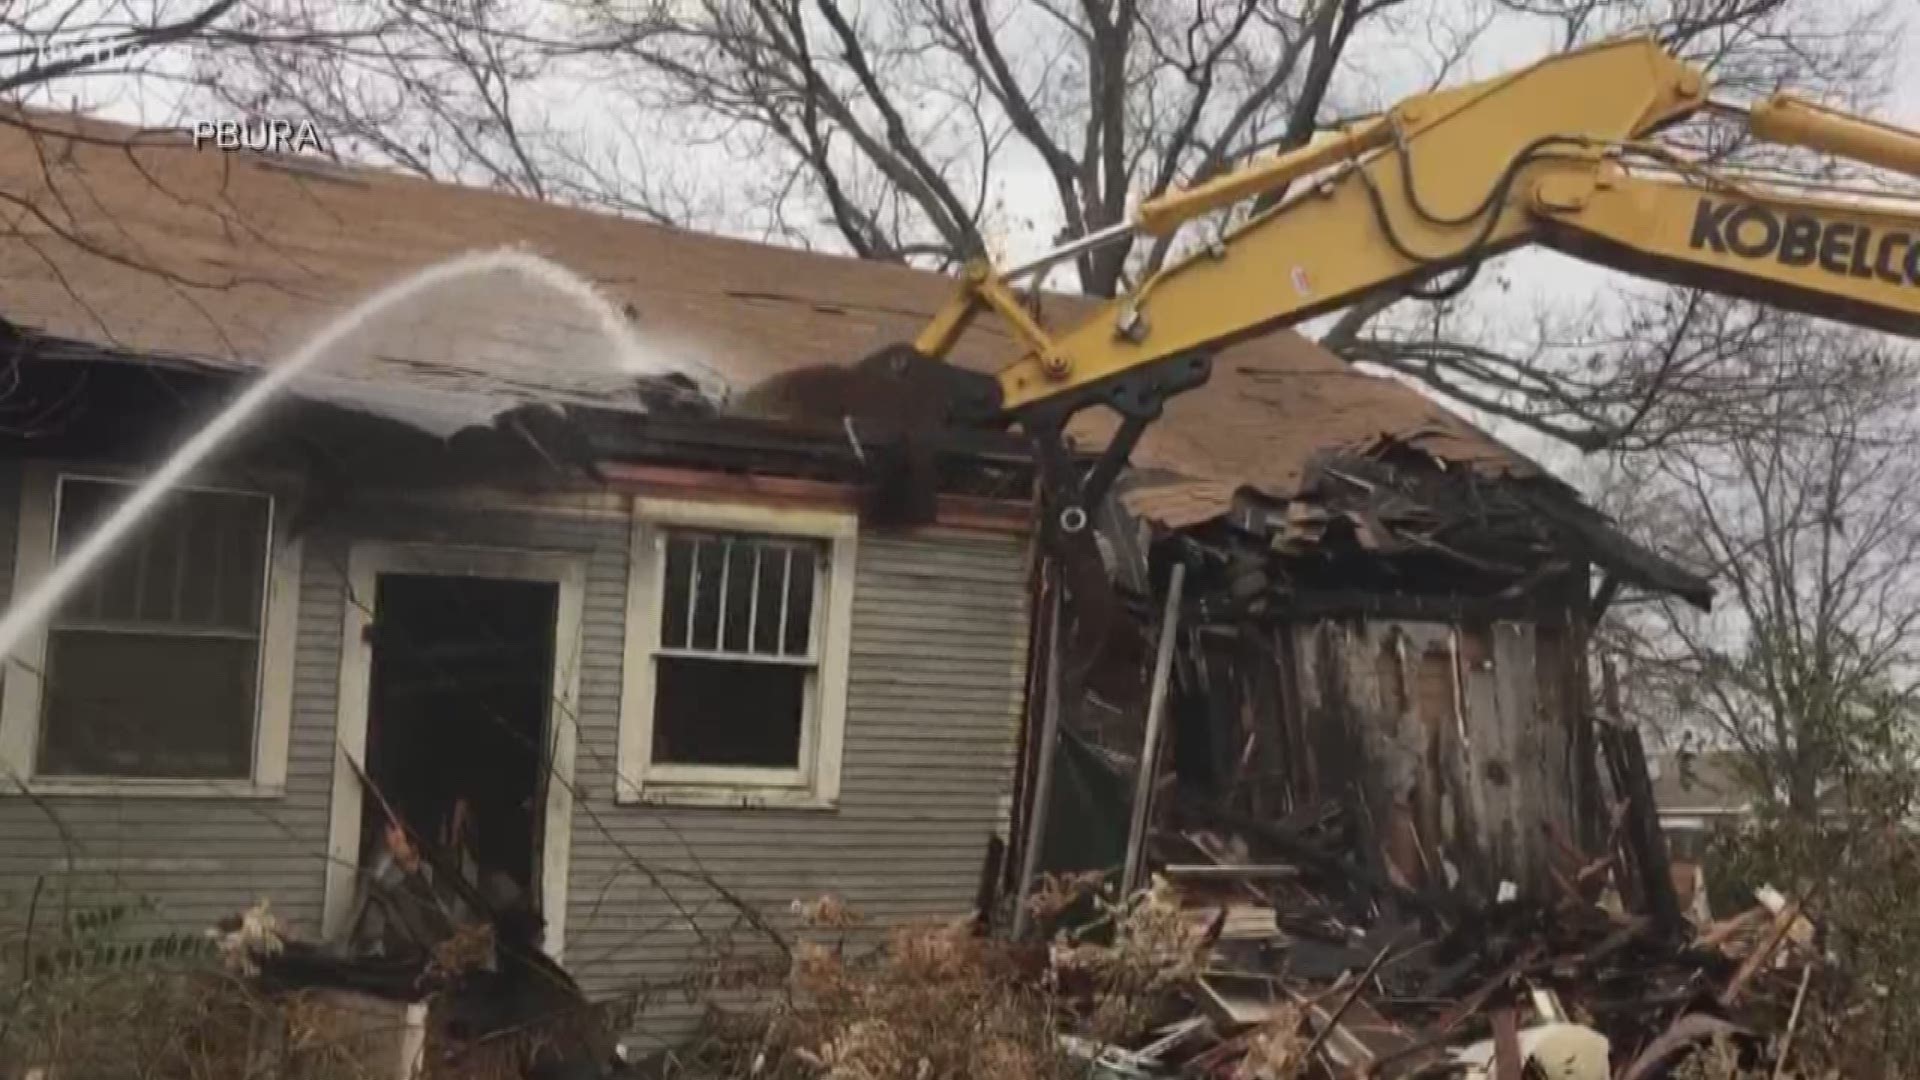 Homes that are doing more harm than good in Pine Bluff are being torn down.